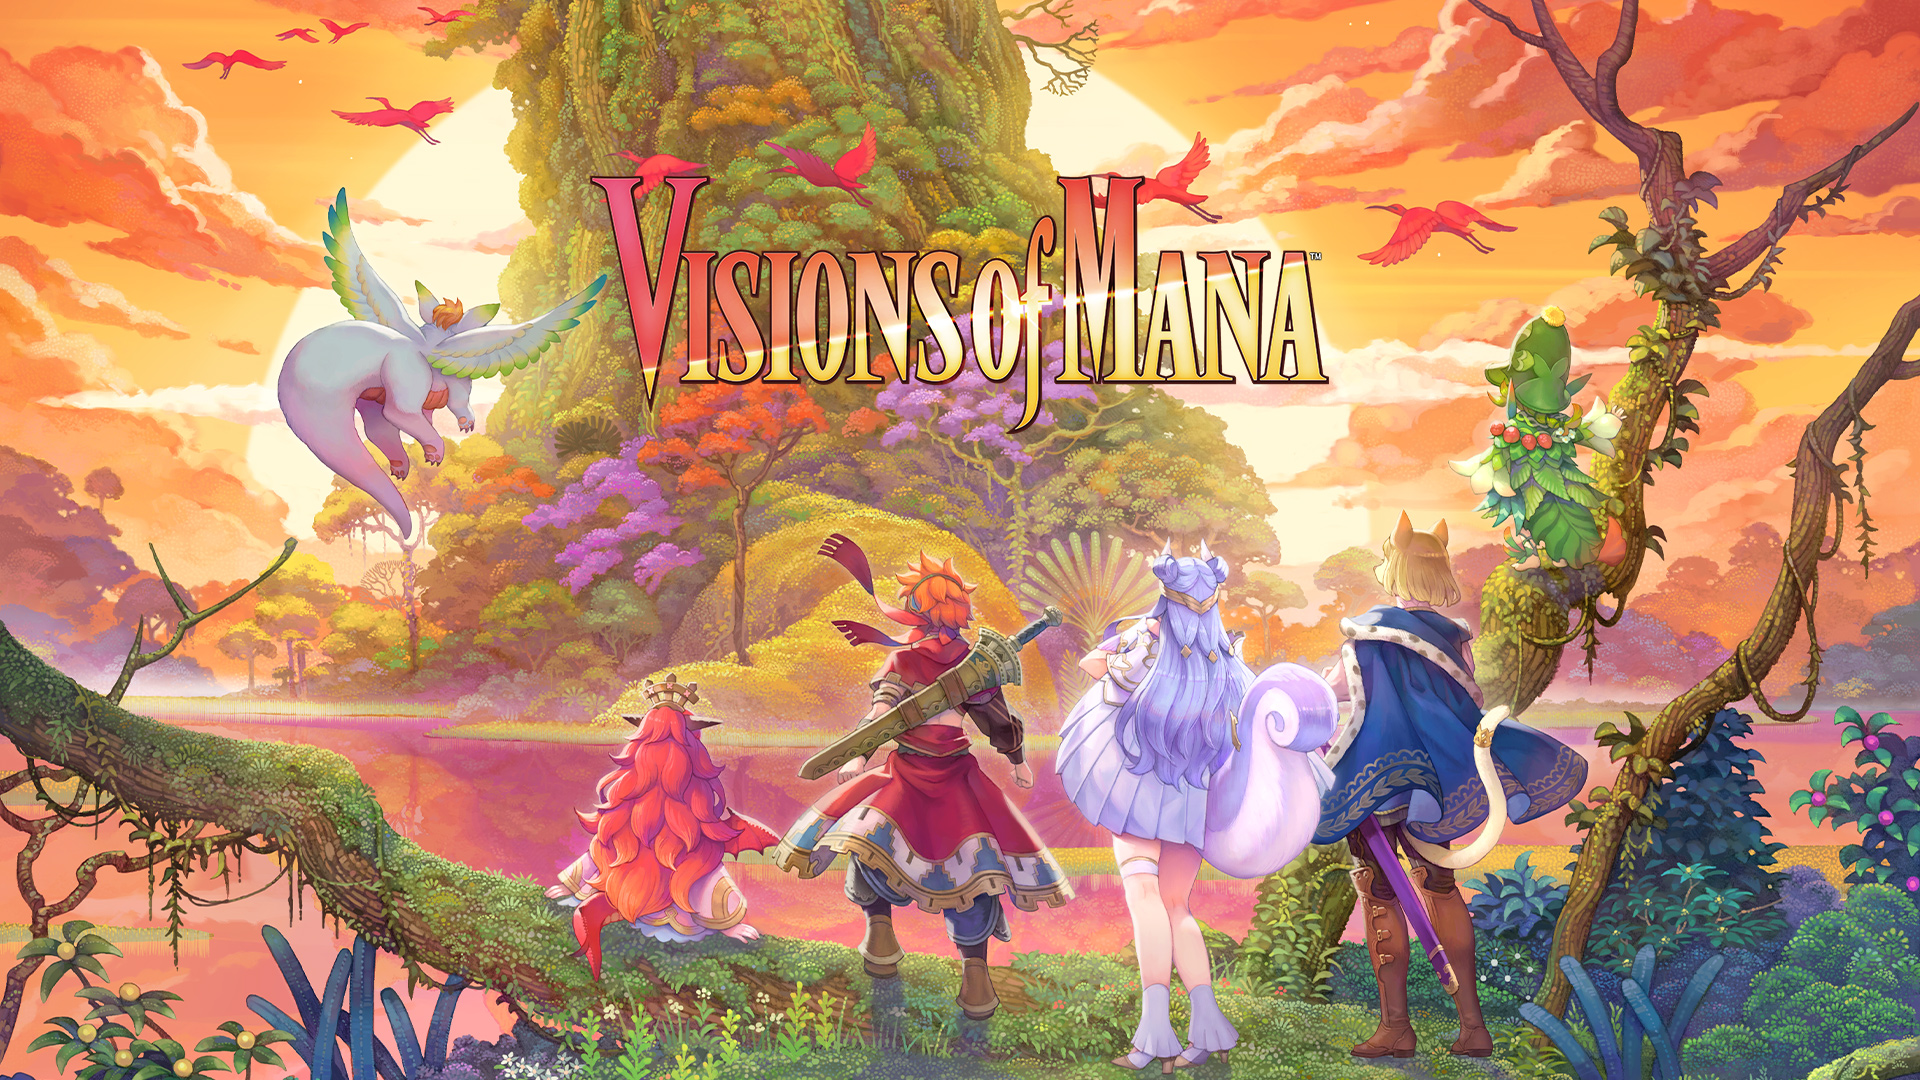 Square Enix’s Visions of Mana could be coming to Game Pass | VGC